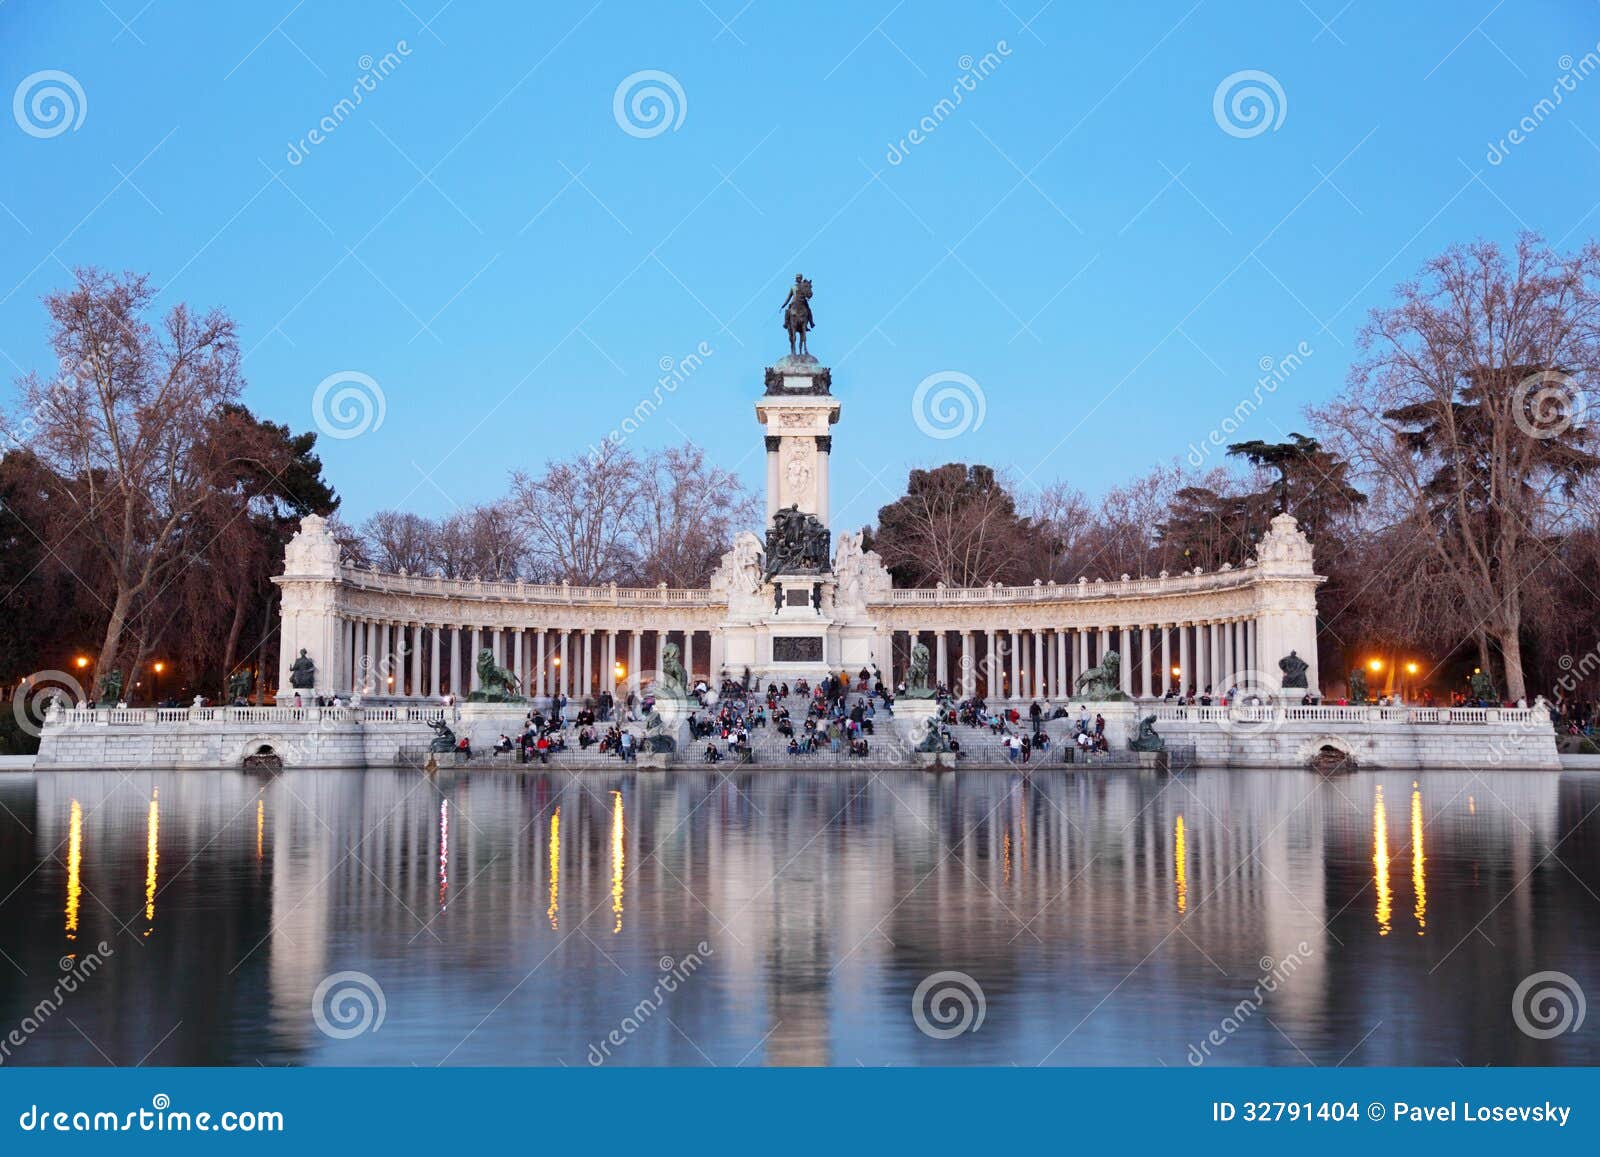 tourists sit near monument to alfonso xii at pond in retiro park